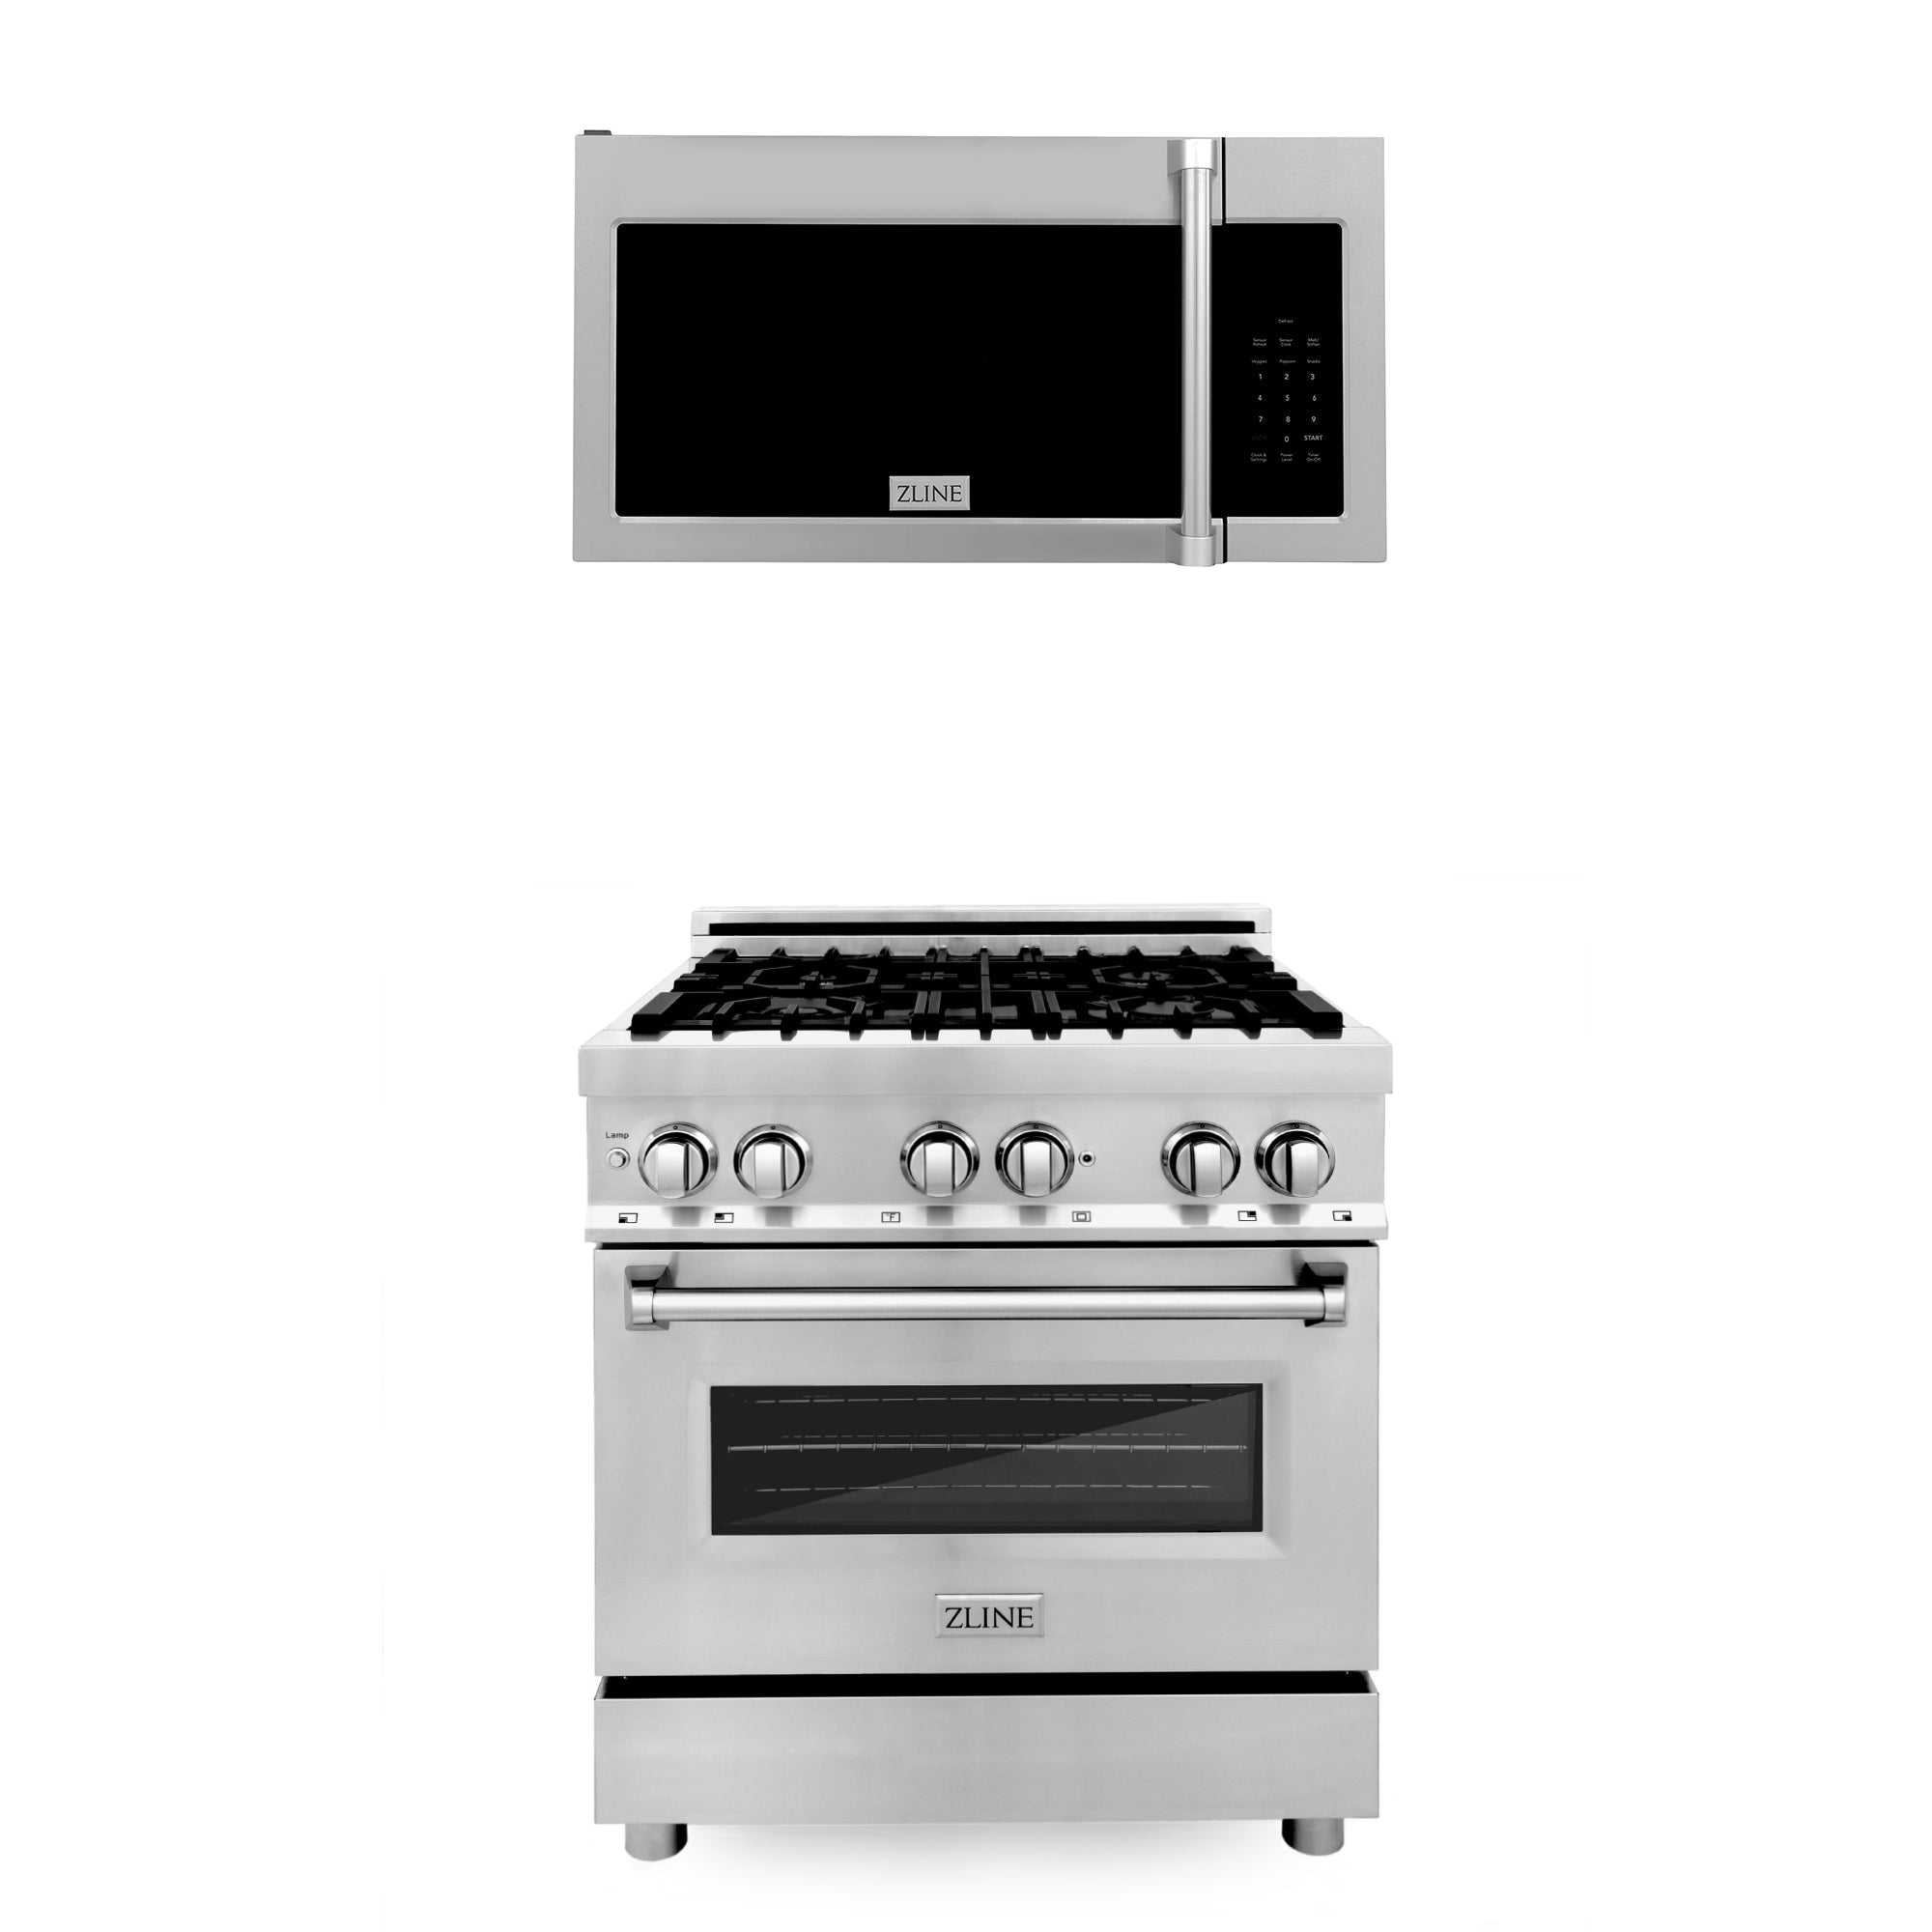 ZLINE 2 Piece Kitchen Appliance Package - 30" Stainless Steel Dual Fuel Range and Over The Range Microwave with Traditional Handle (2KP-RAOTRH30)